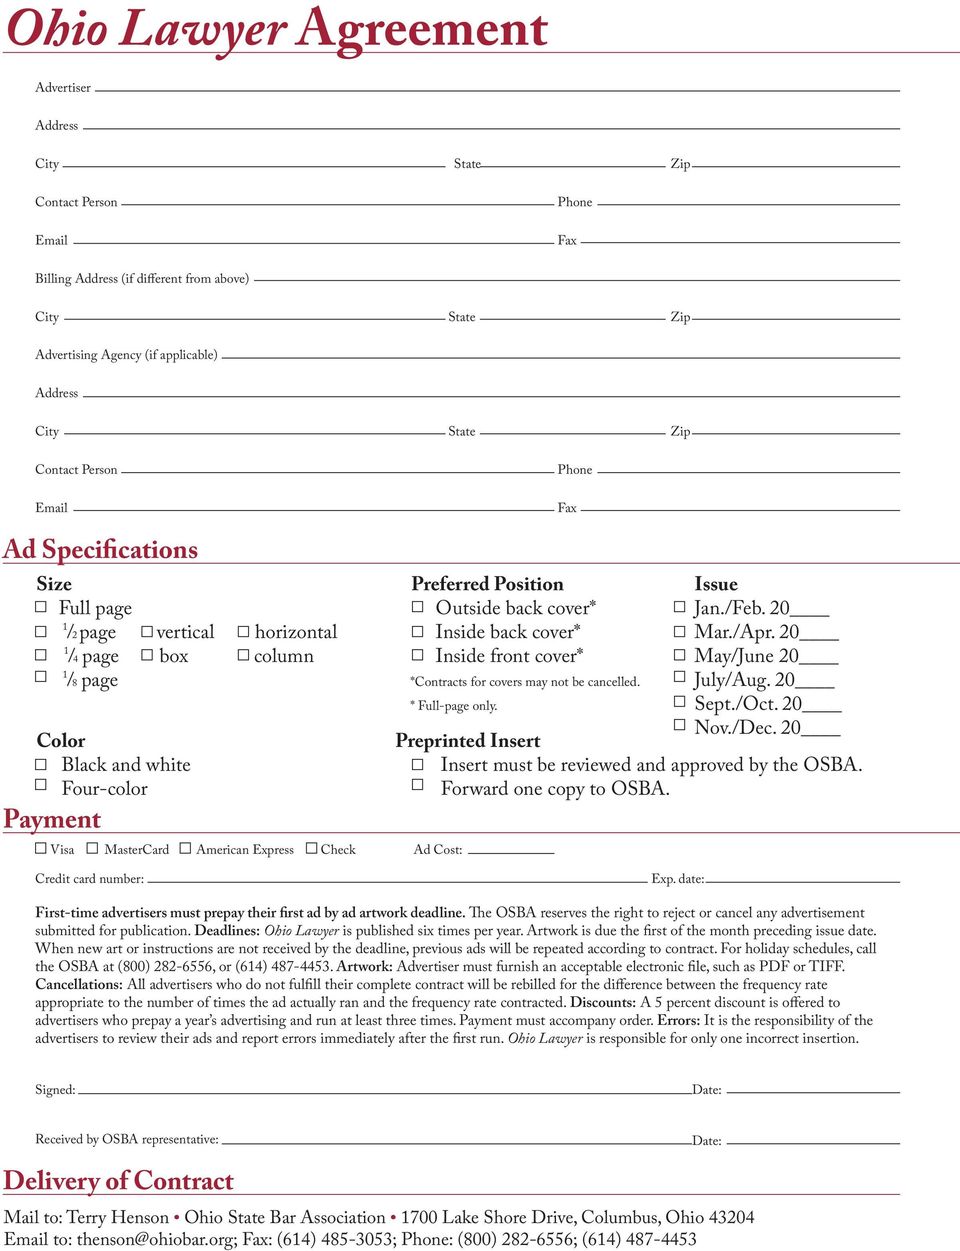 Sept./Oct. 20 Color Preprinted Insert Nov./Dec. 20 Black and white Insert must be reviewed and approved by the OSBA. Four-color Forward one copy to OSBA.